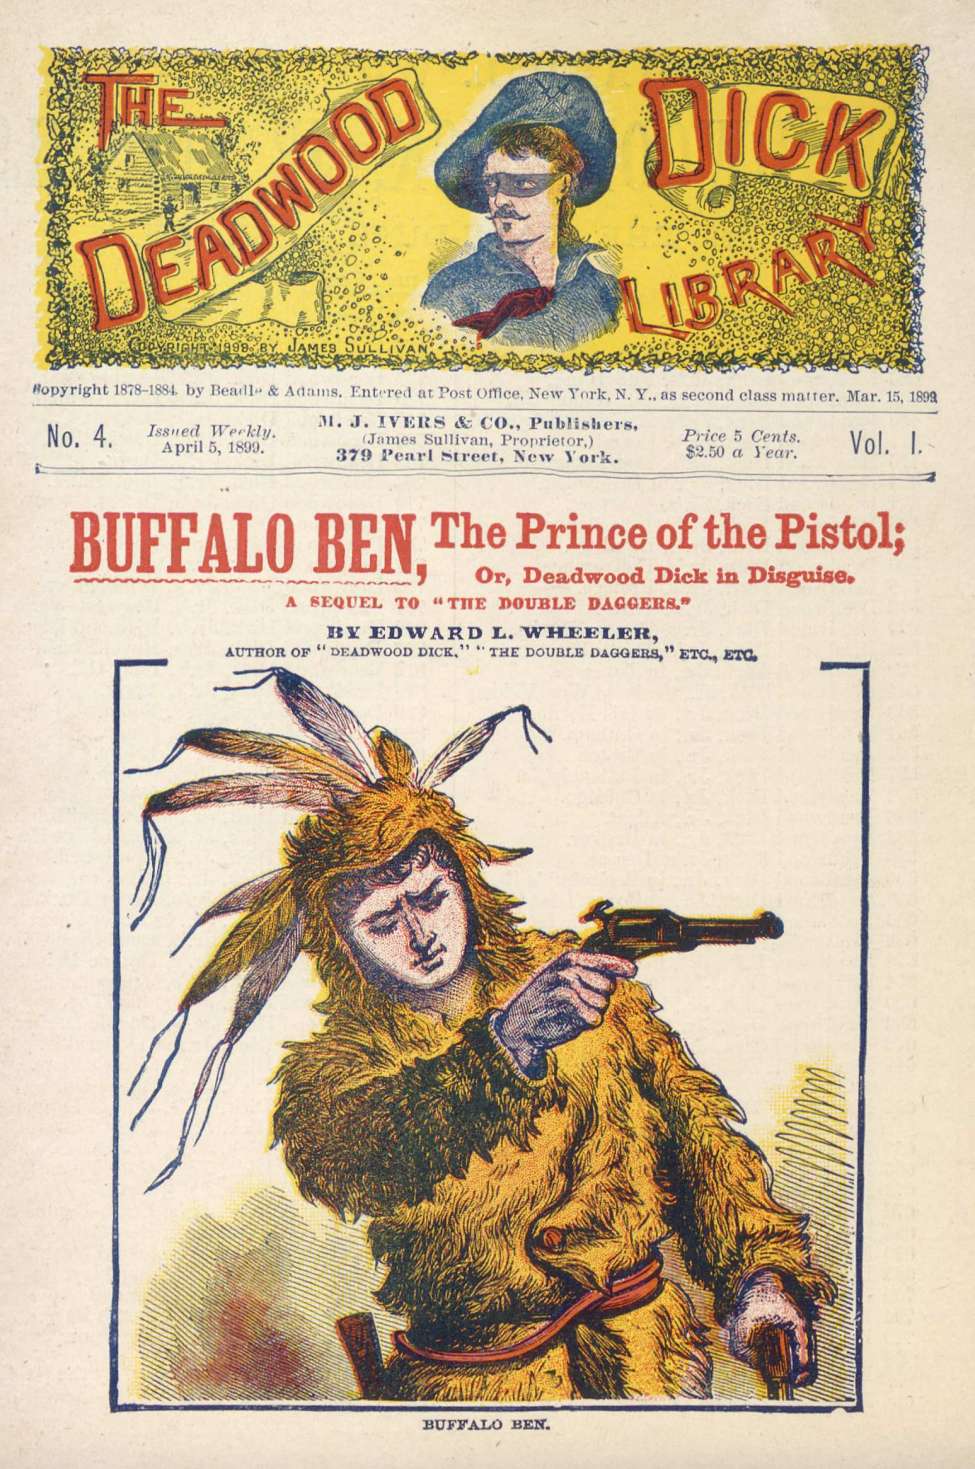 Book Cover For Deadwood Dick Library v1 4 - Buffalo Ben, The Prince of the Pistol